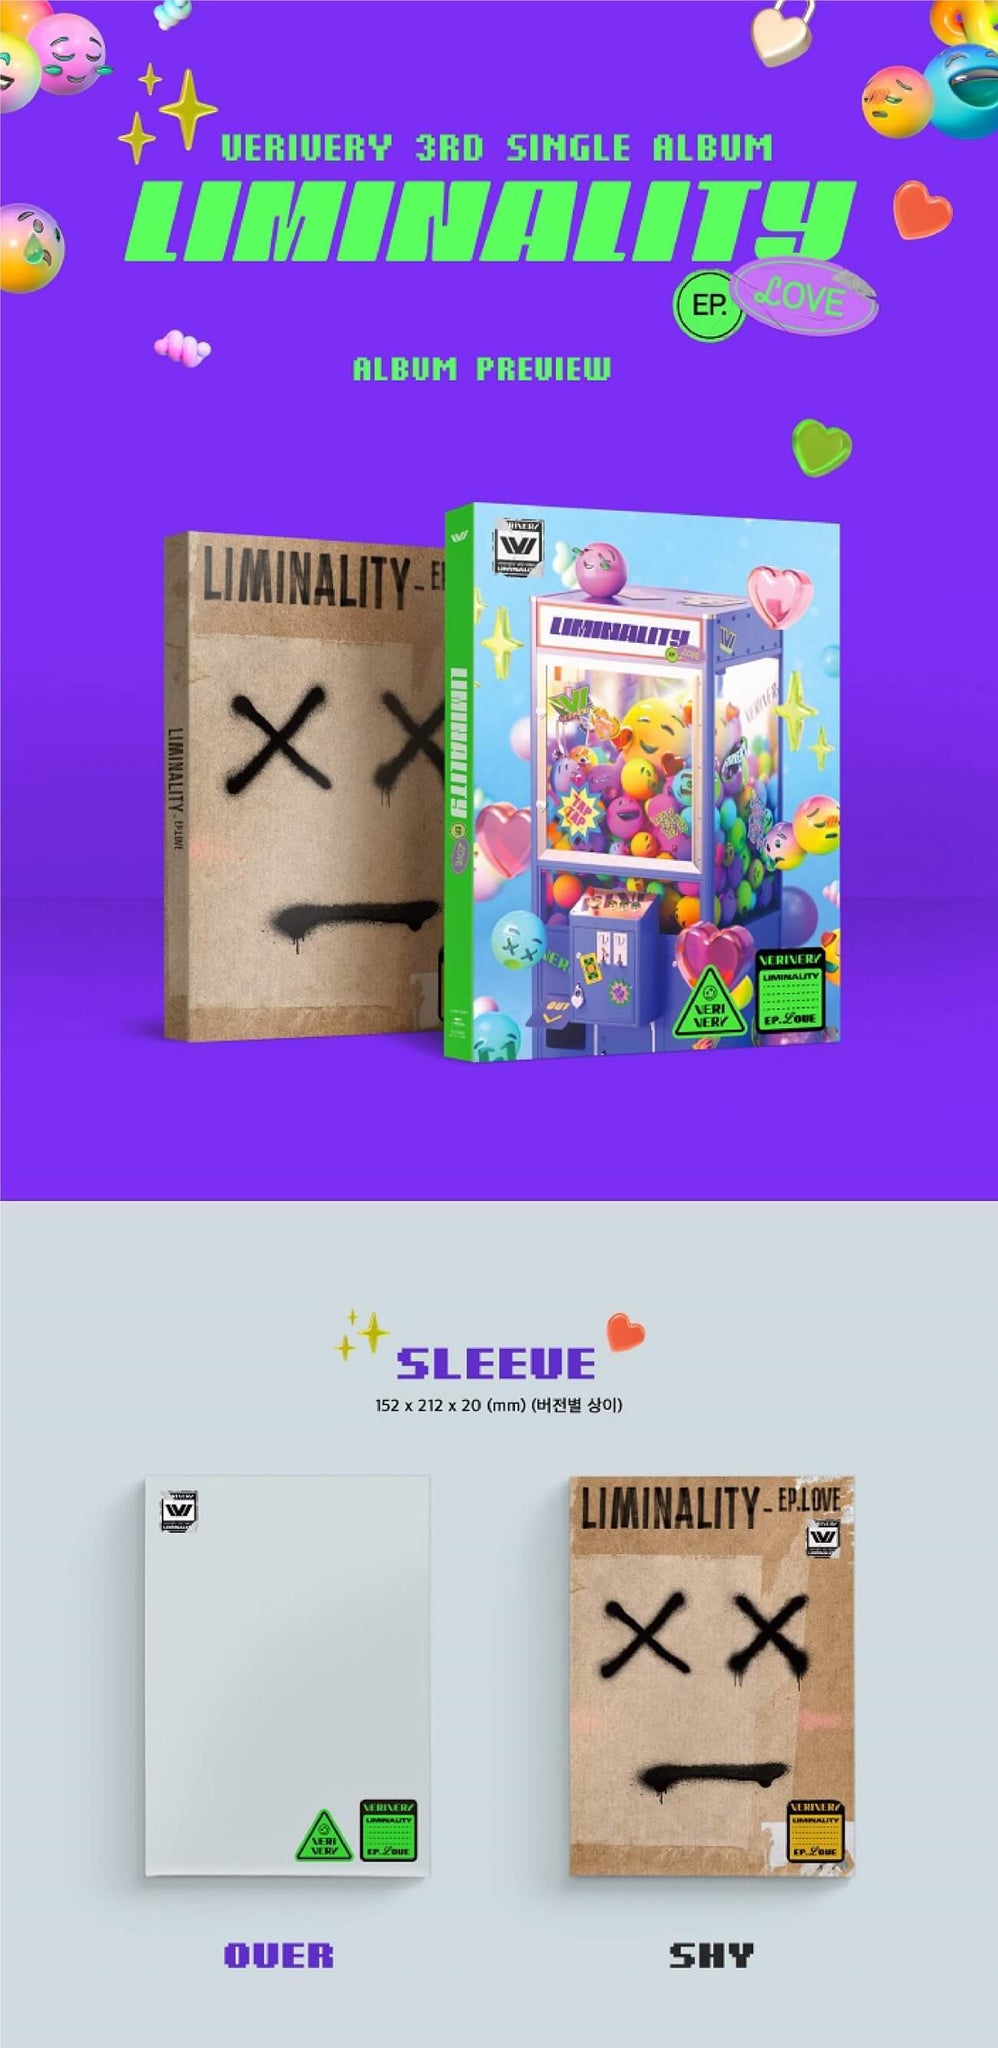 VERIVERY 3rd Single Album Liminality - EP.LOVE Inclusions Sleeve